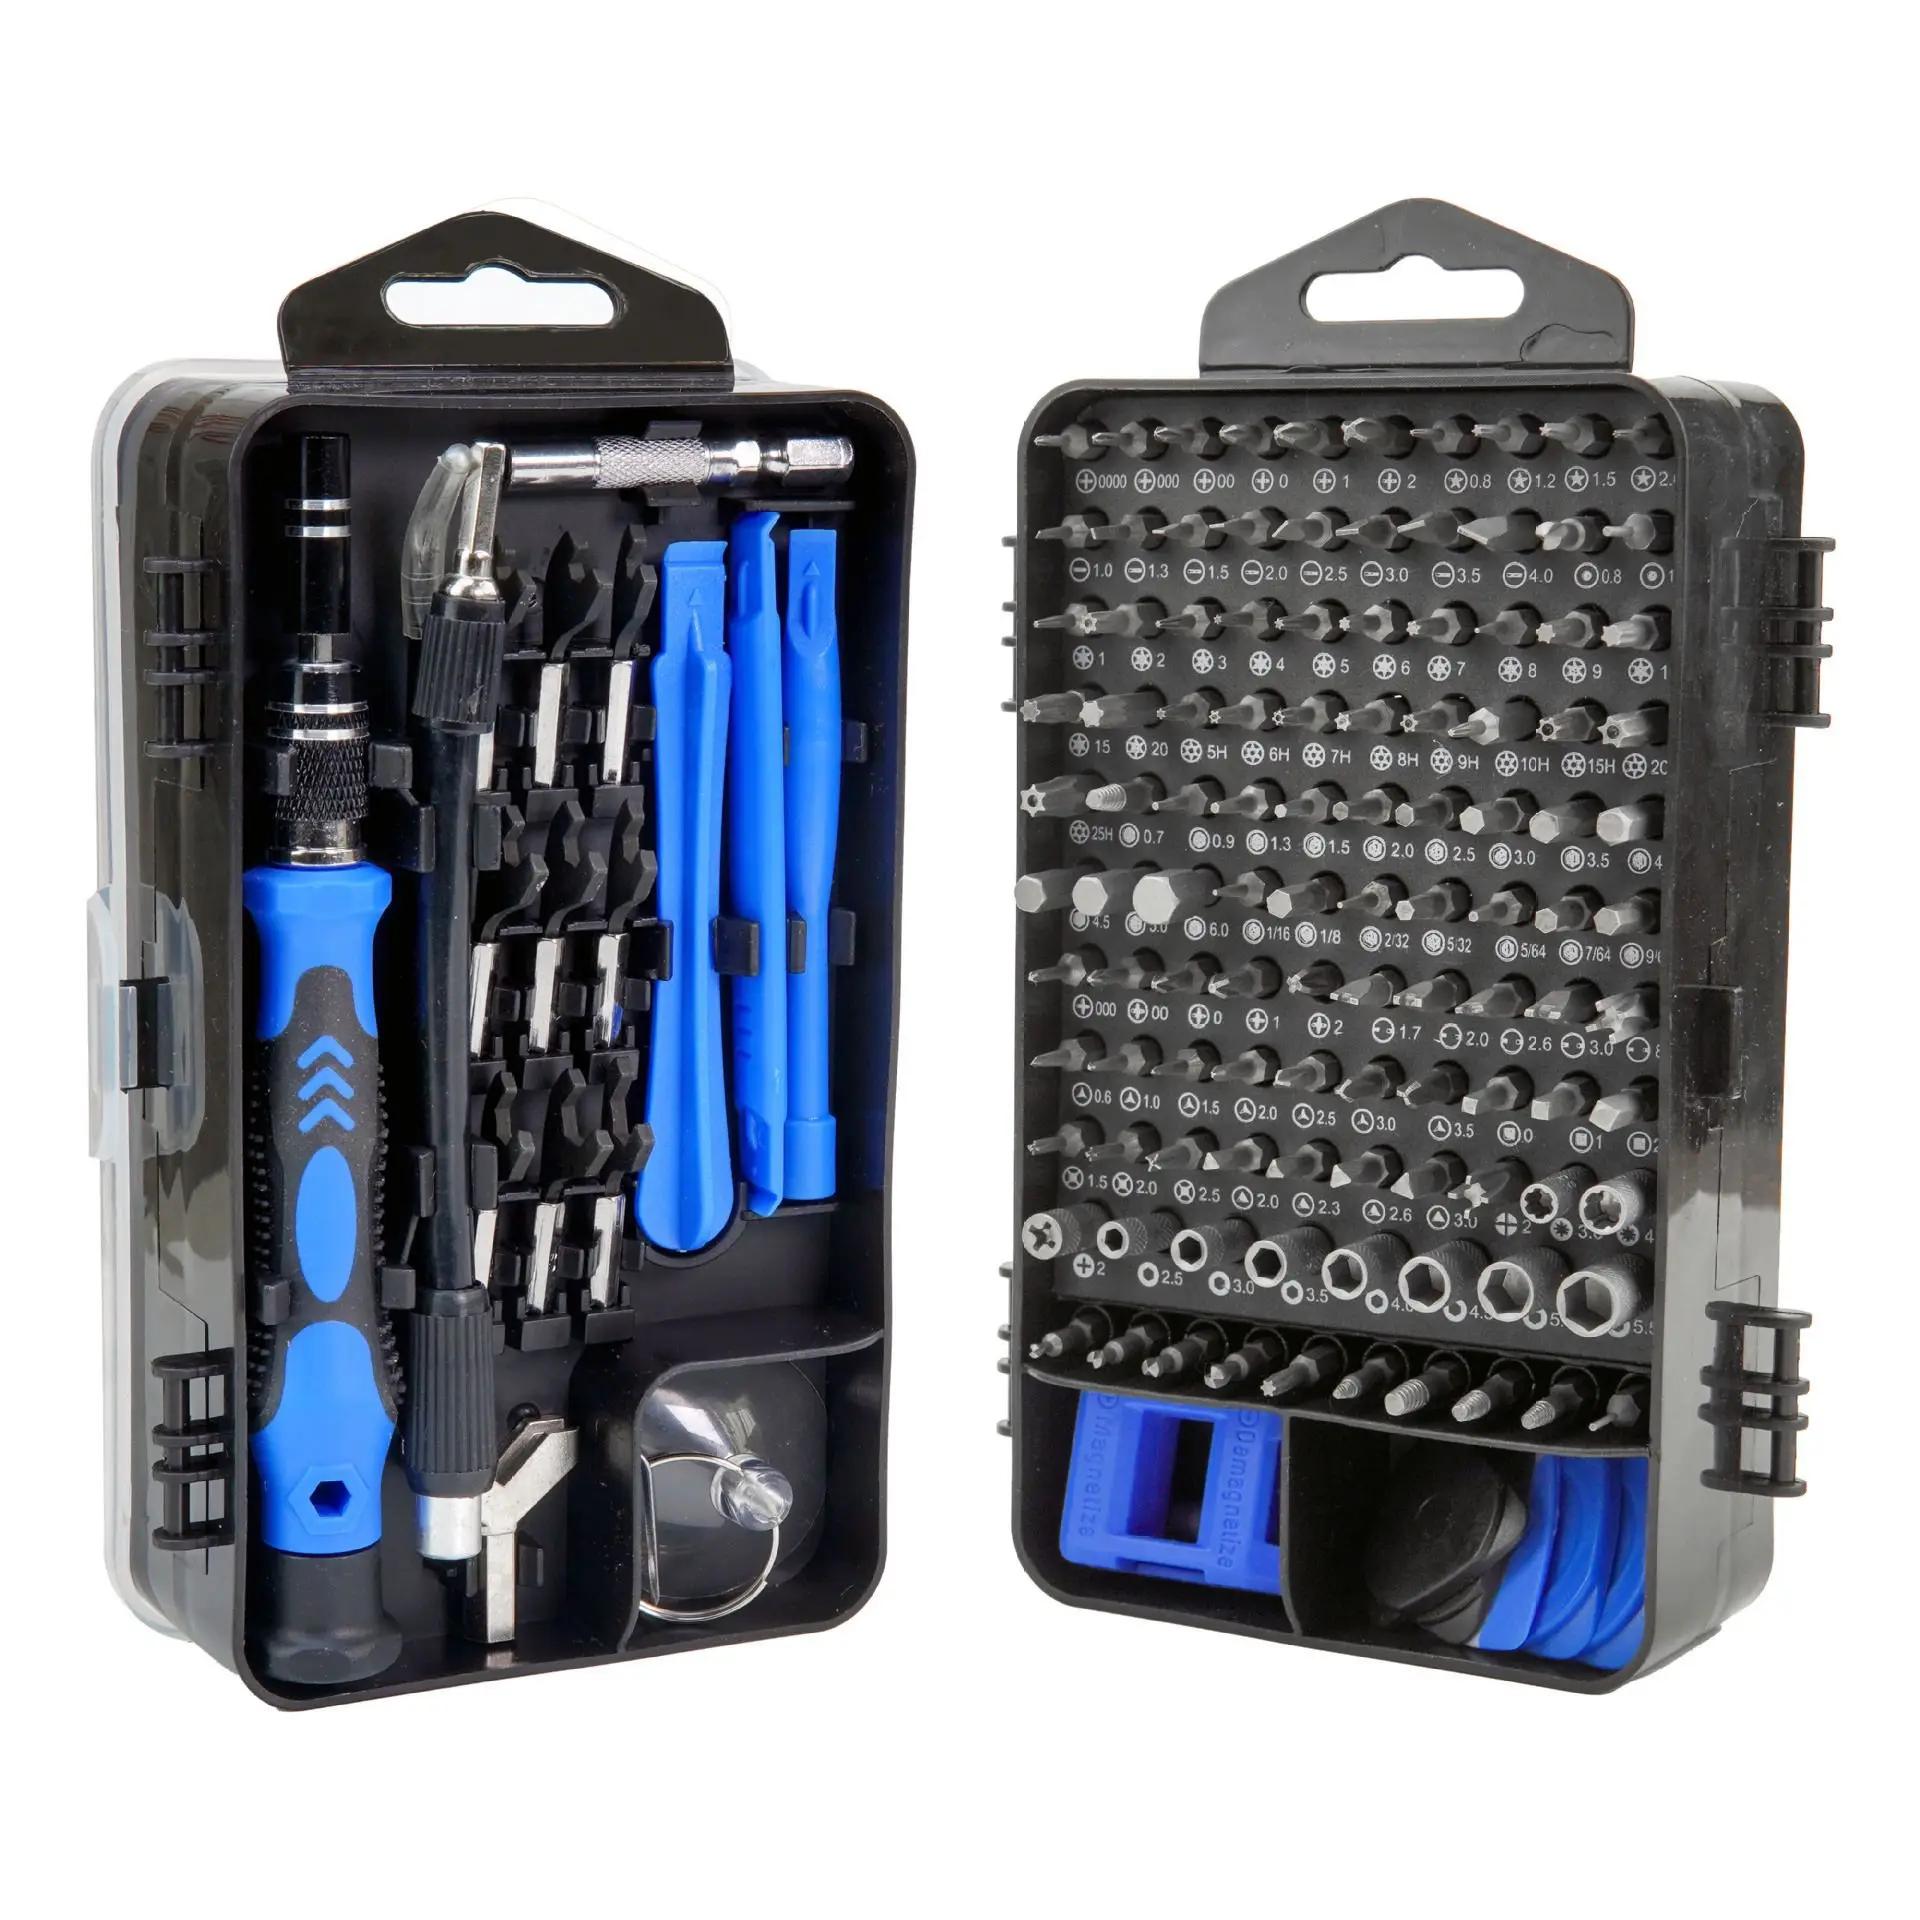 138 In One Screwdriver Set Six Colors Available Household Disassembly Tool Multi-function Precision Screwdriver Head Tool Set